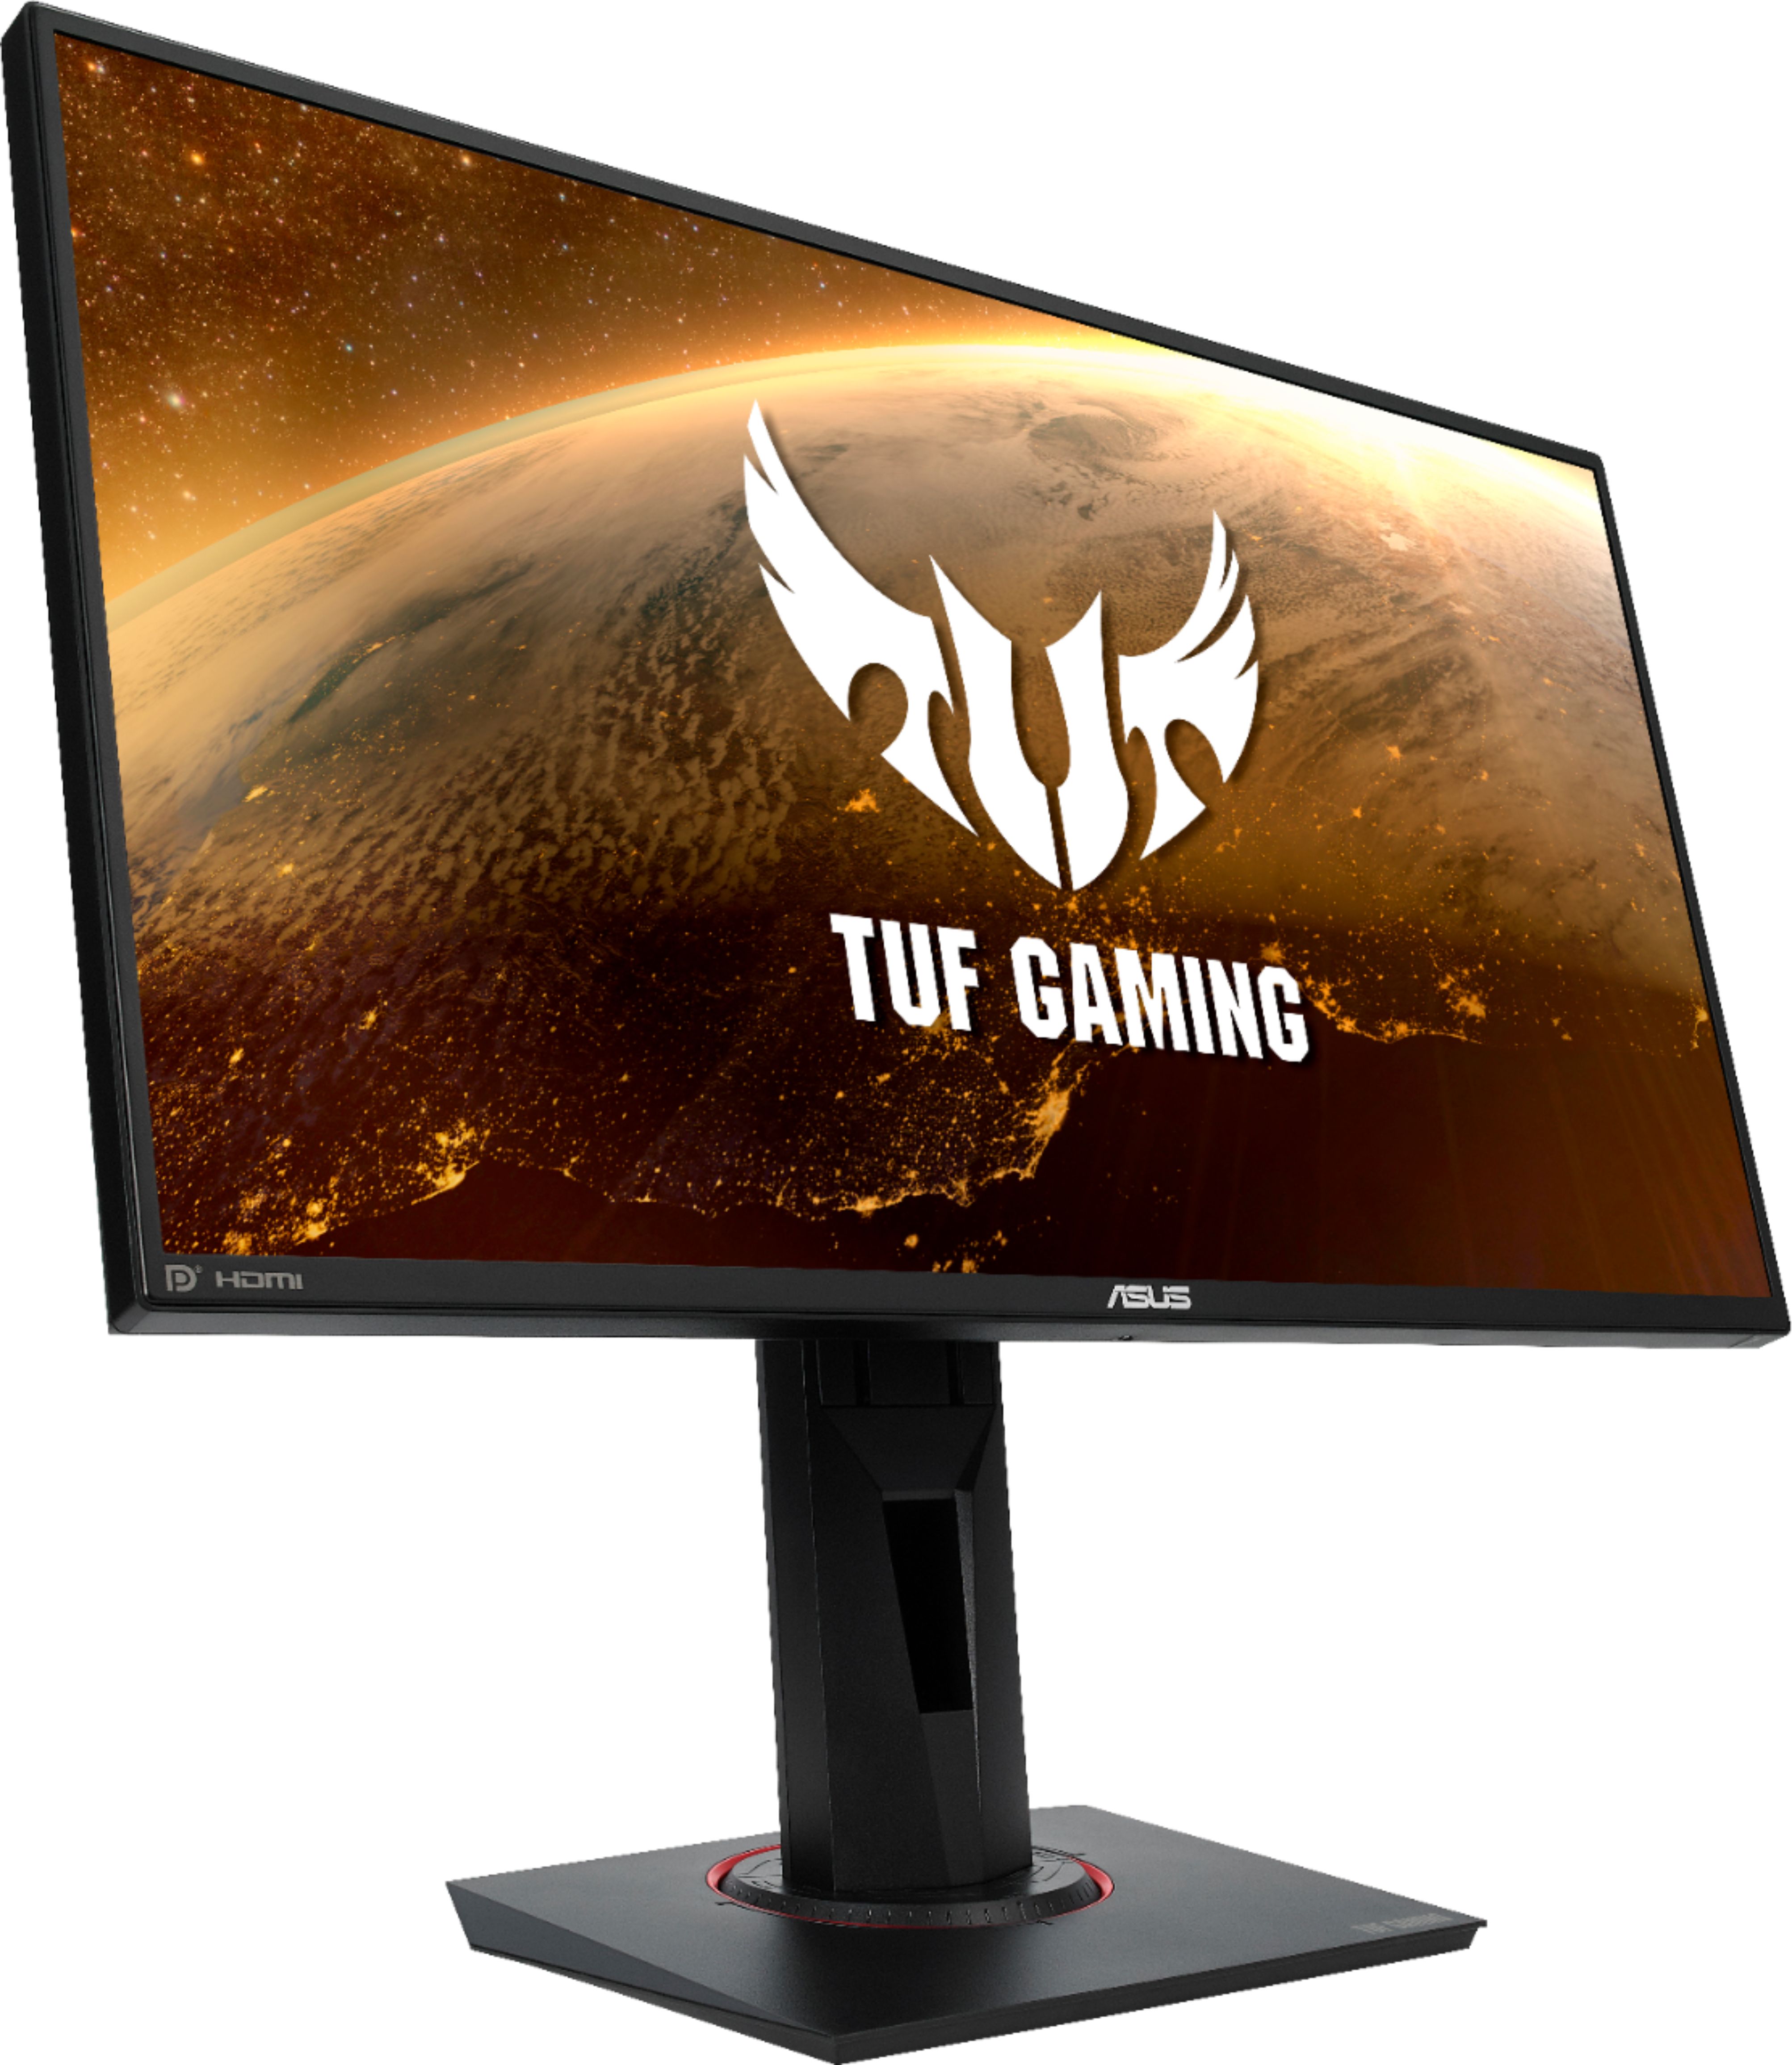 Left View: ASUS - Geek Squad Certified Refurbished TUF Gaming 24.5" IPS LED FHD G-SYNC Monitor with HDR - Black